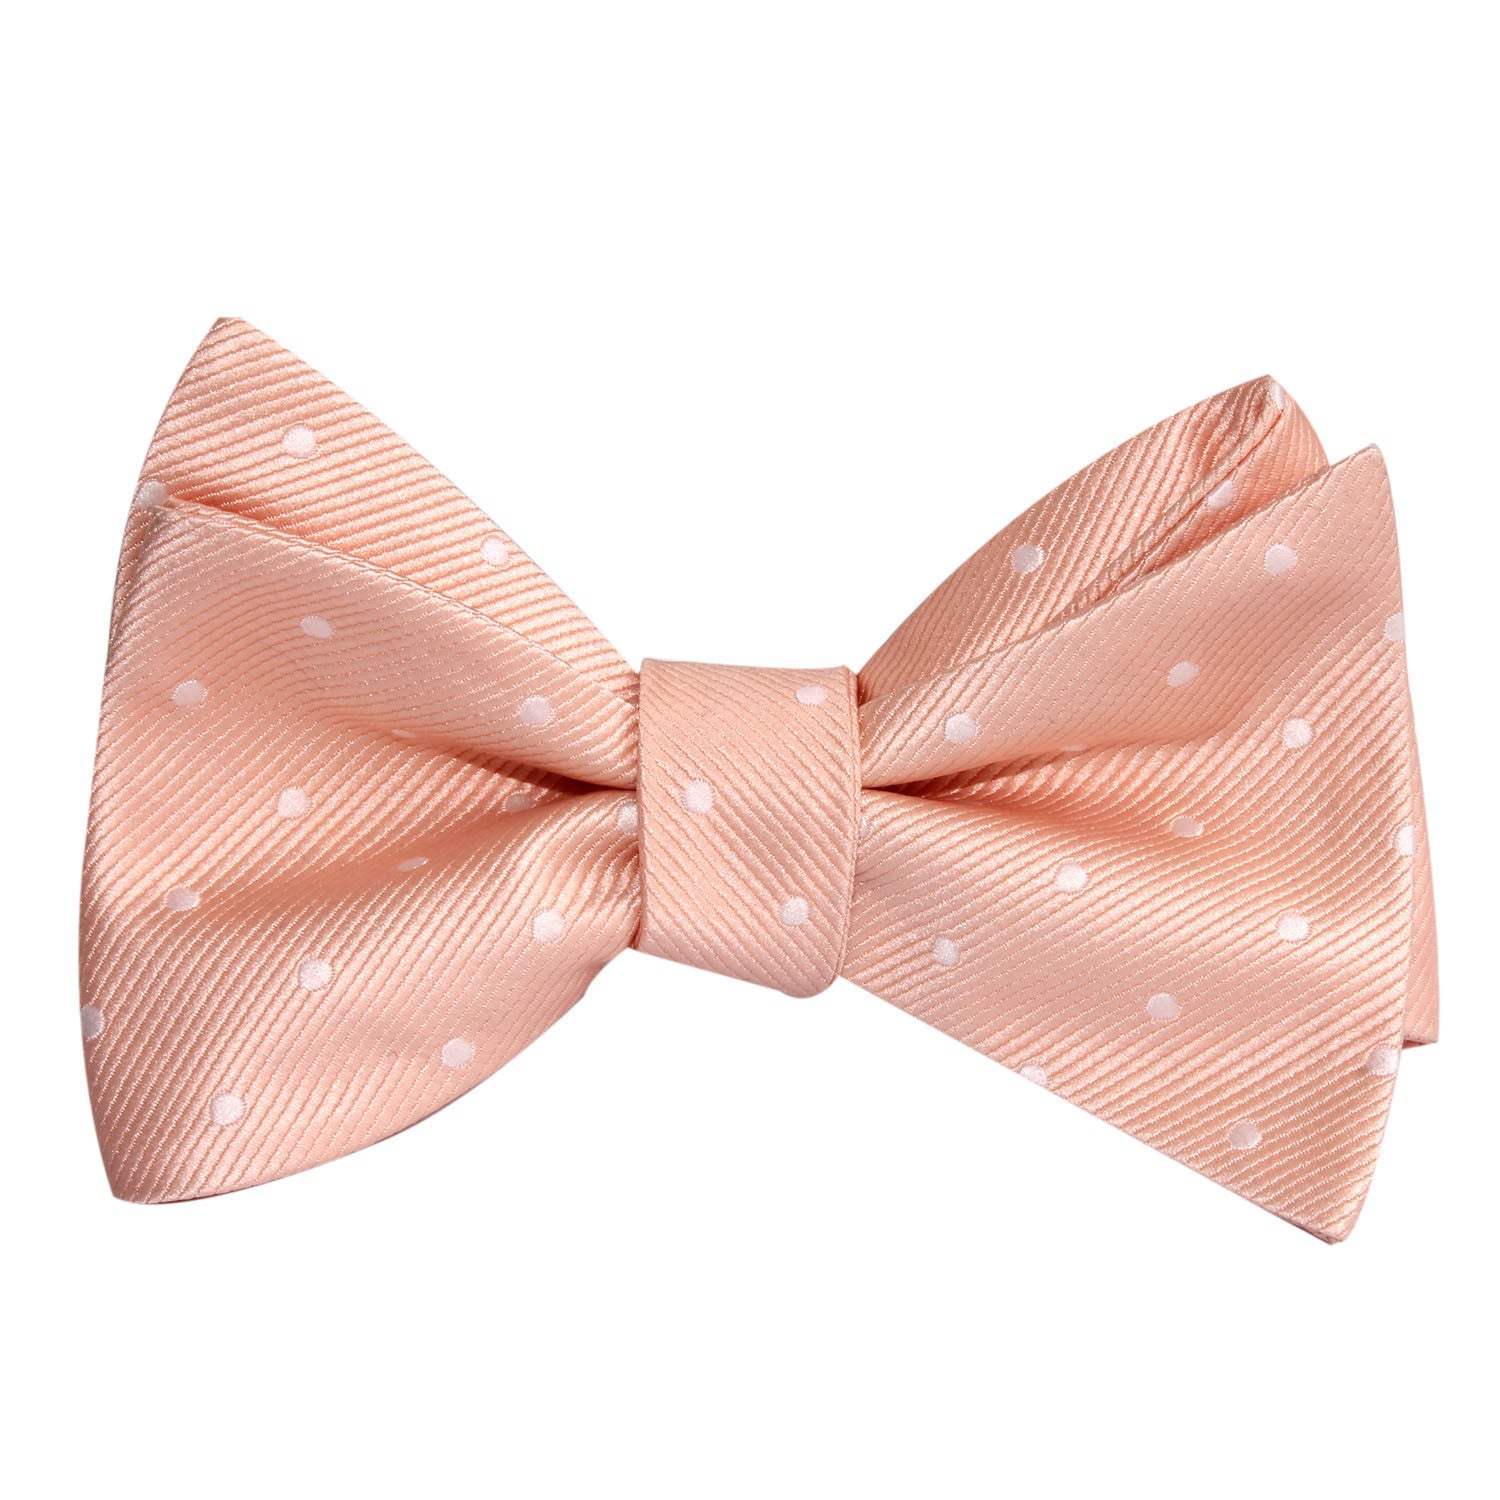 Peach with White Polka Dots Self Tie Bow Tie 1